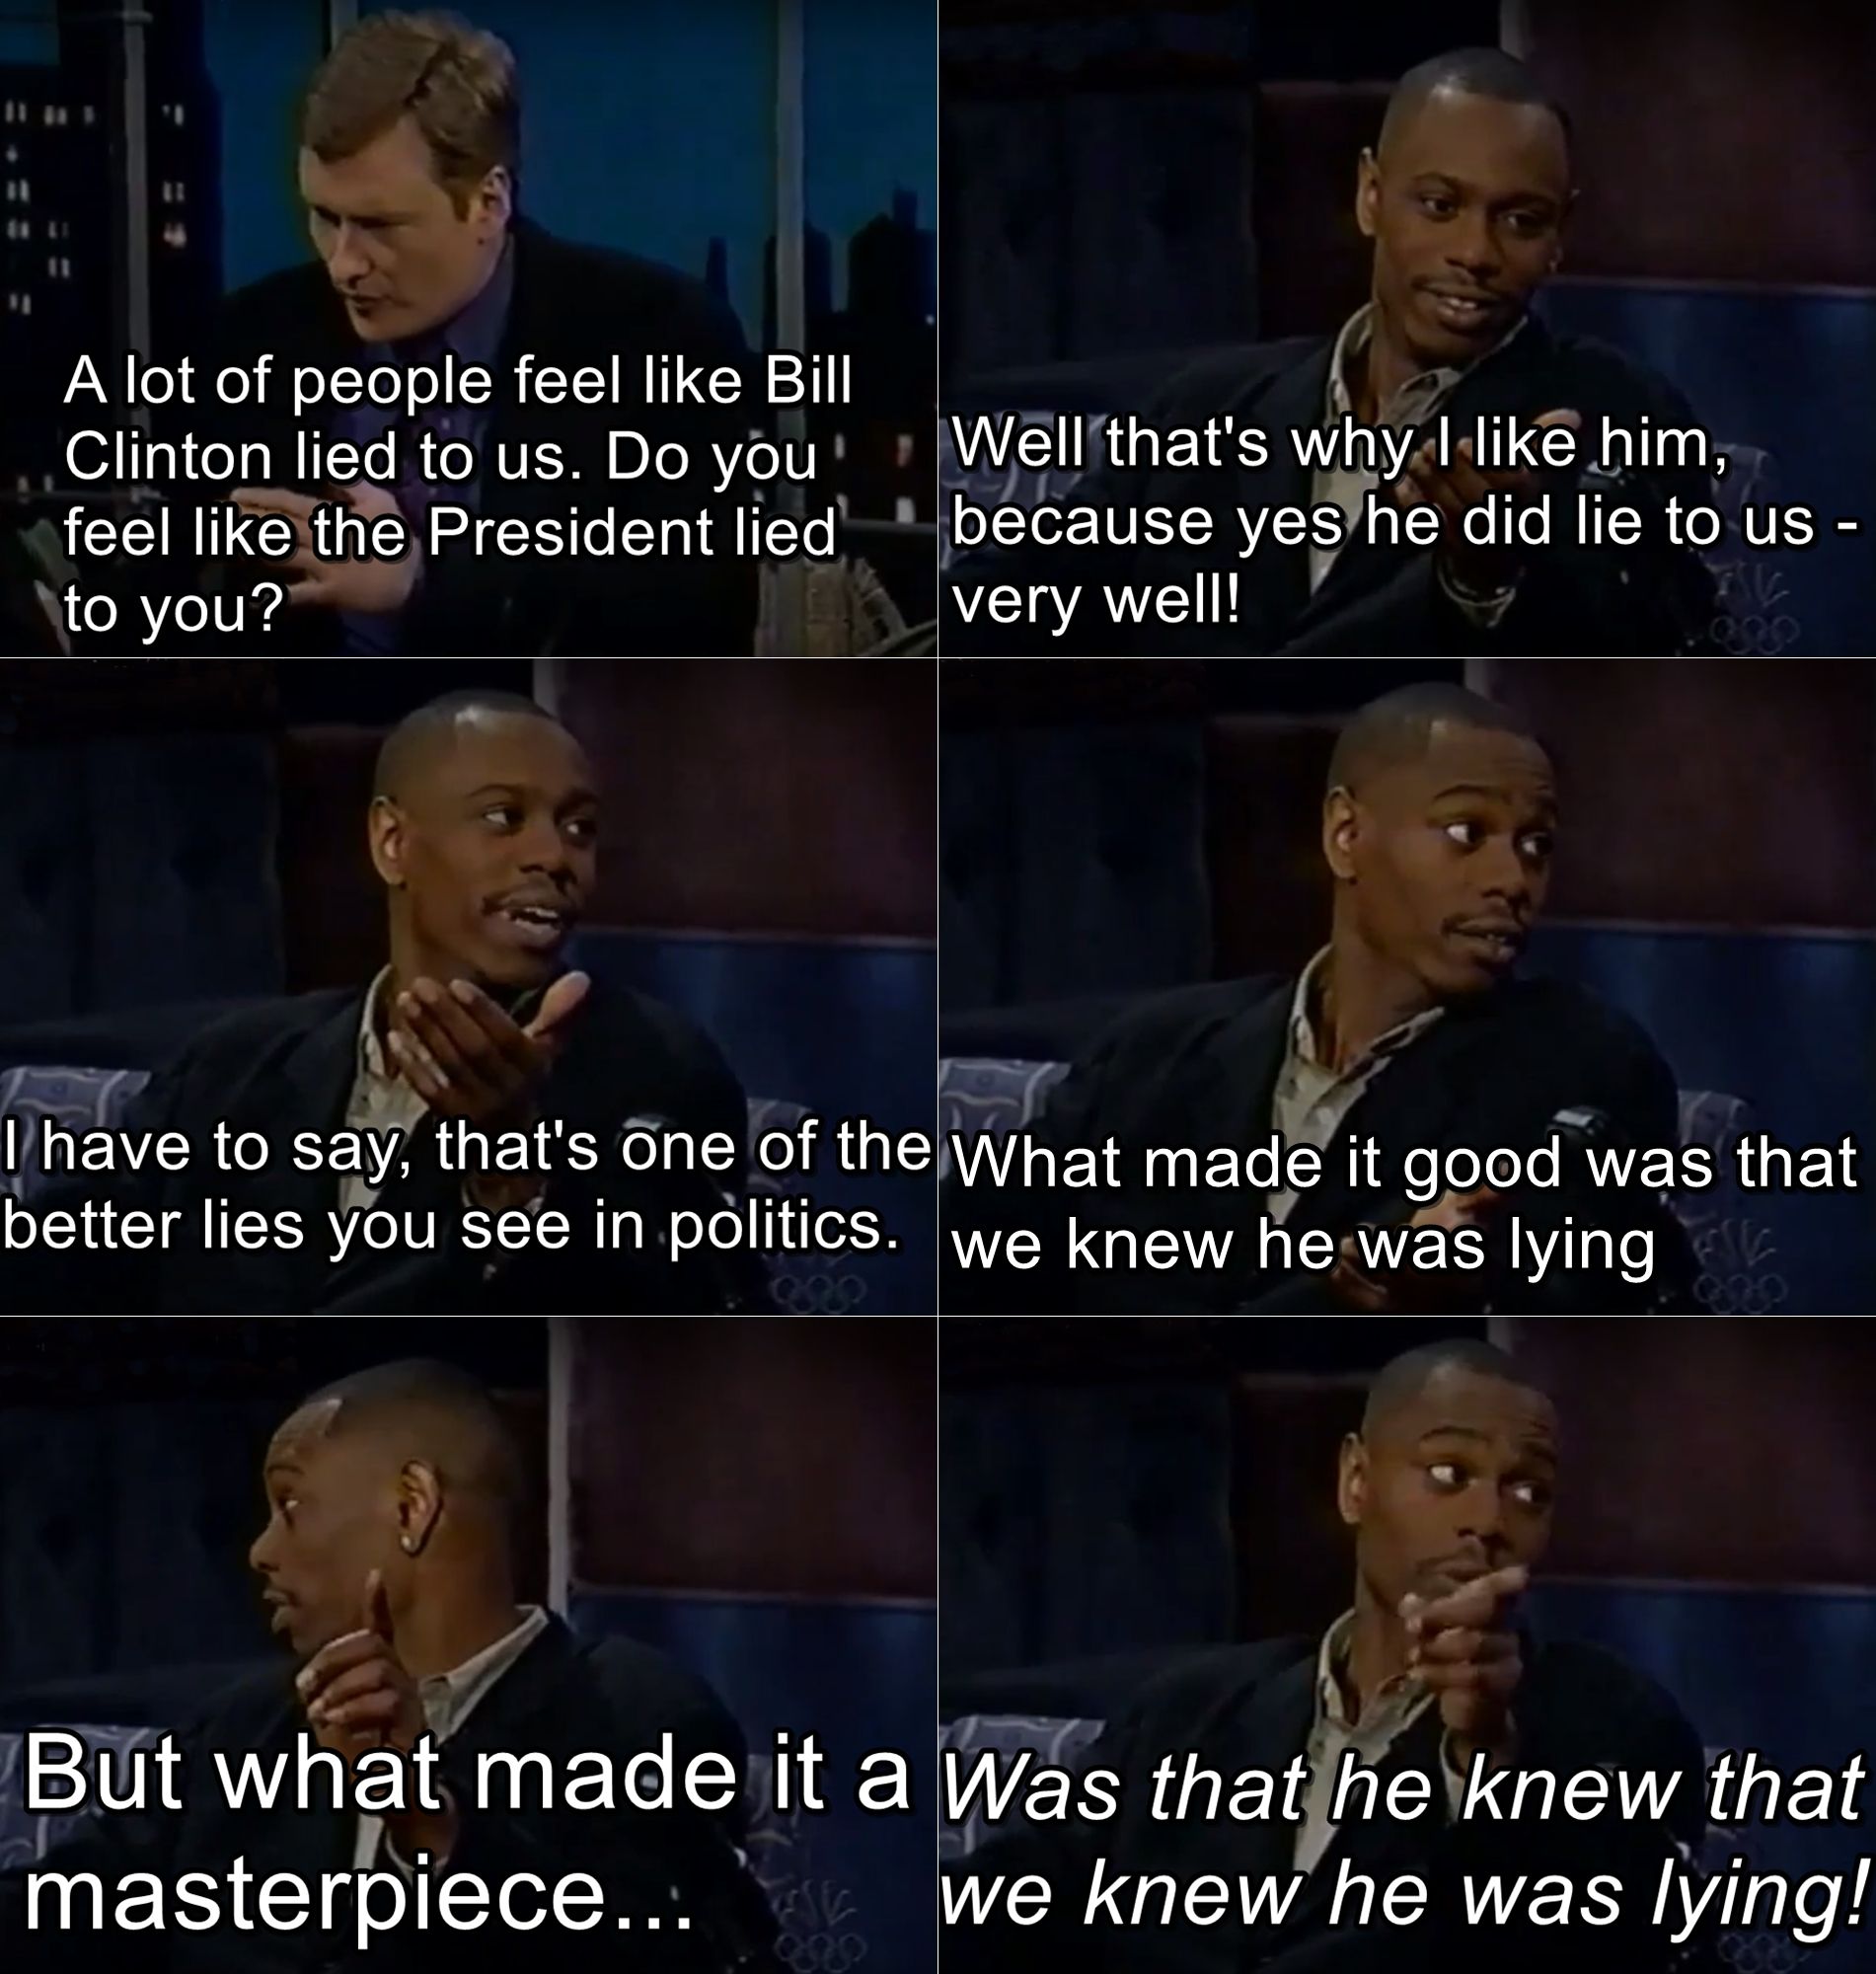 Dave Chapelle in an interview with Conan, 1999.